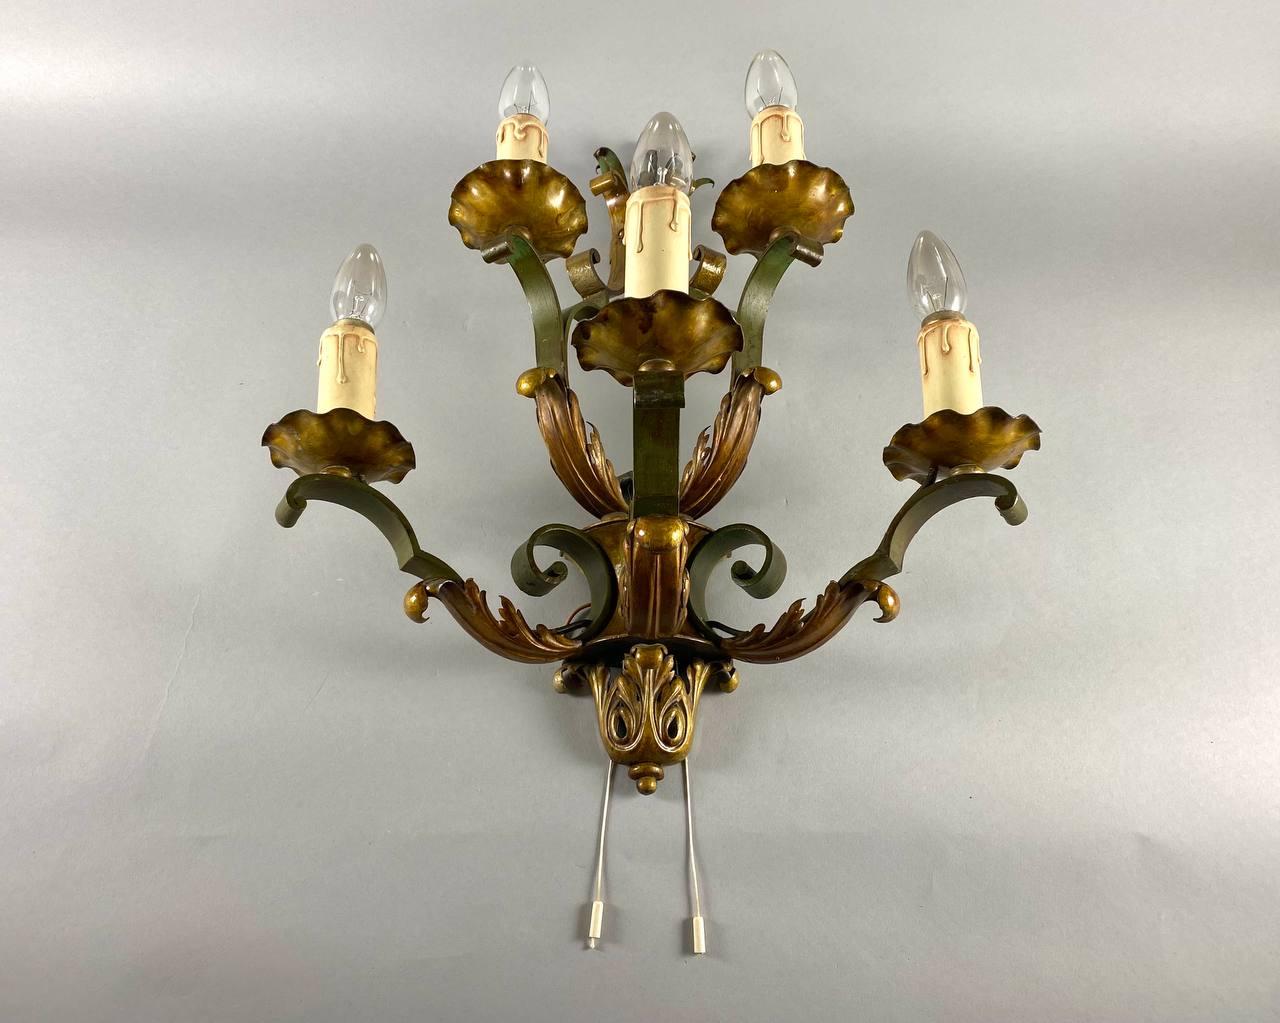 Charming Vintage Wall Sconce For 5 Light Point Metal Tiered Wall Lamp For Sale 2